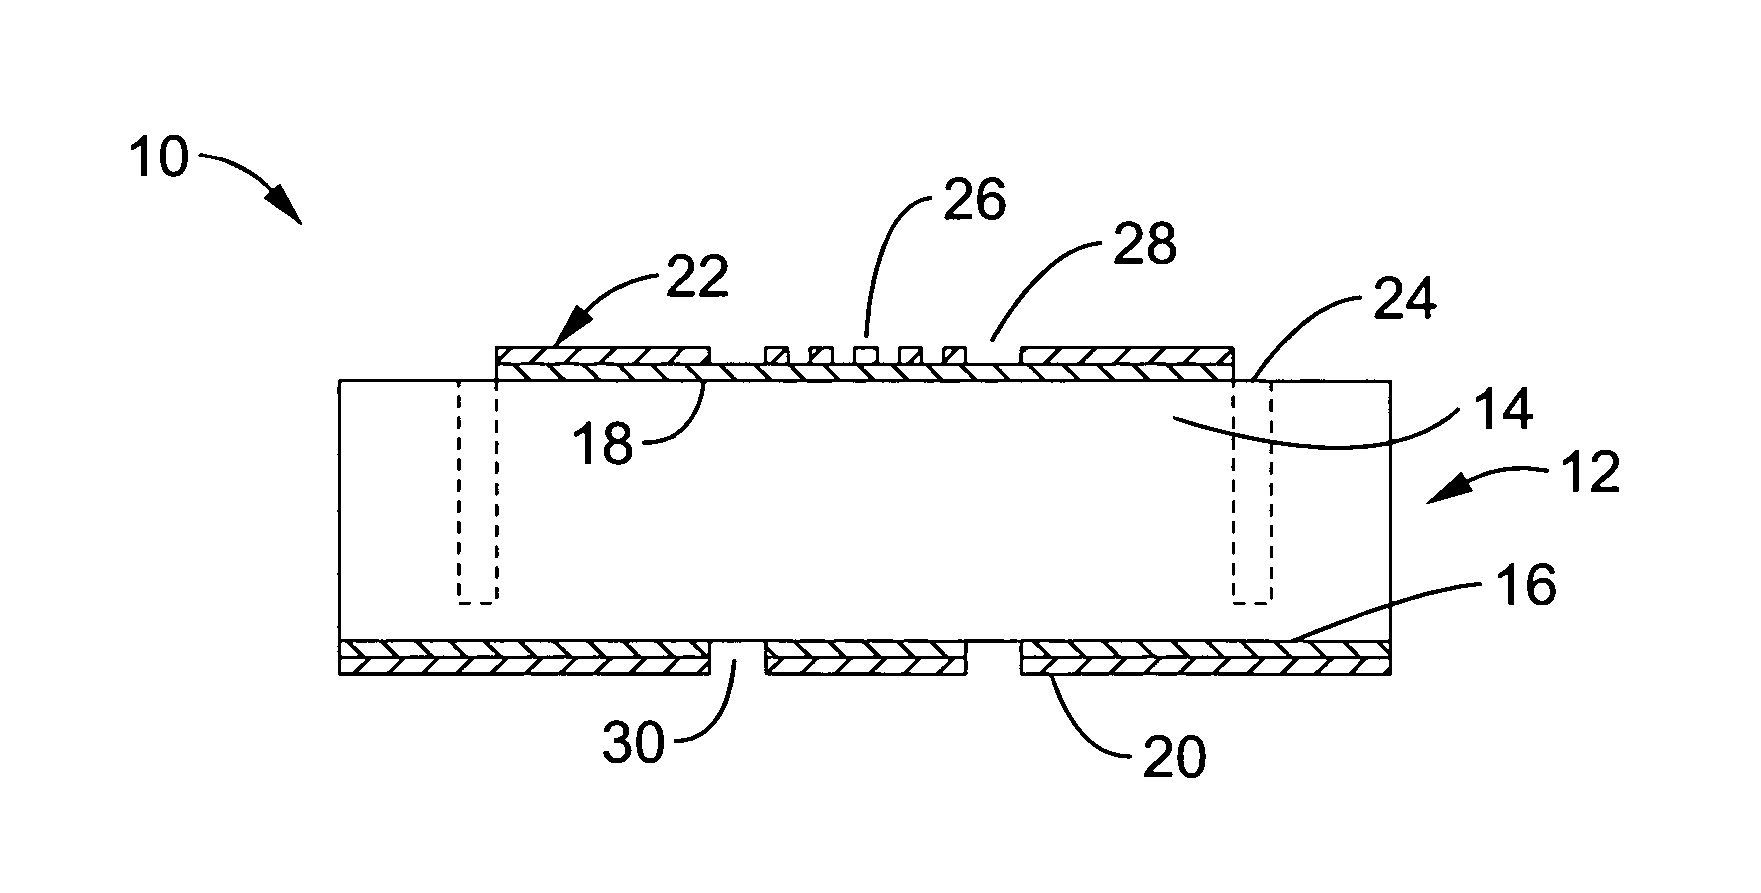 Lithium-drifted silicon detector with segmented contacts